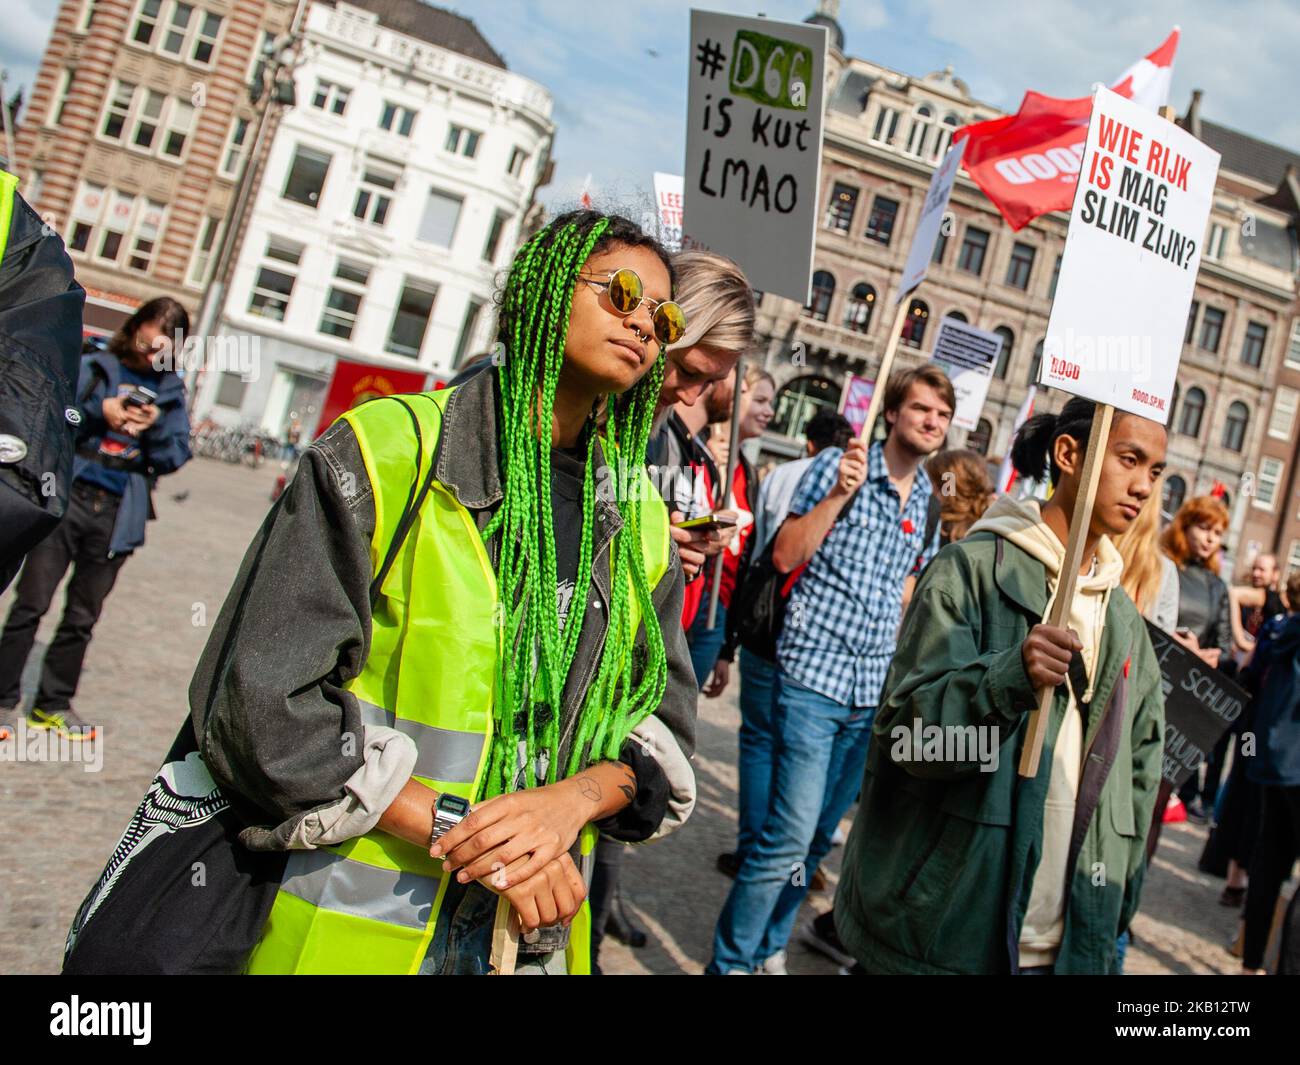 Hundreds of students gathered on 14 September 2018 at the Dam square in Amsterdam, Netherlands to protest against the increase of the interest on the student loan. The Dutch government wants to increase the interest on student loans as of 2020, according to a legislative proposal sent to the Tweede Kamer, the lower house of the Dutch parliament, last week. That will amount to 18 percent higher monthly costs for students with a full bearing capacity. National student union LSVb calls this measure unacceptable and demands that it be scrapped. (Photo by Romy Arroyo Fernandez/NurPhoto) Stock Photo